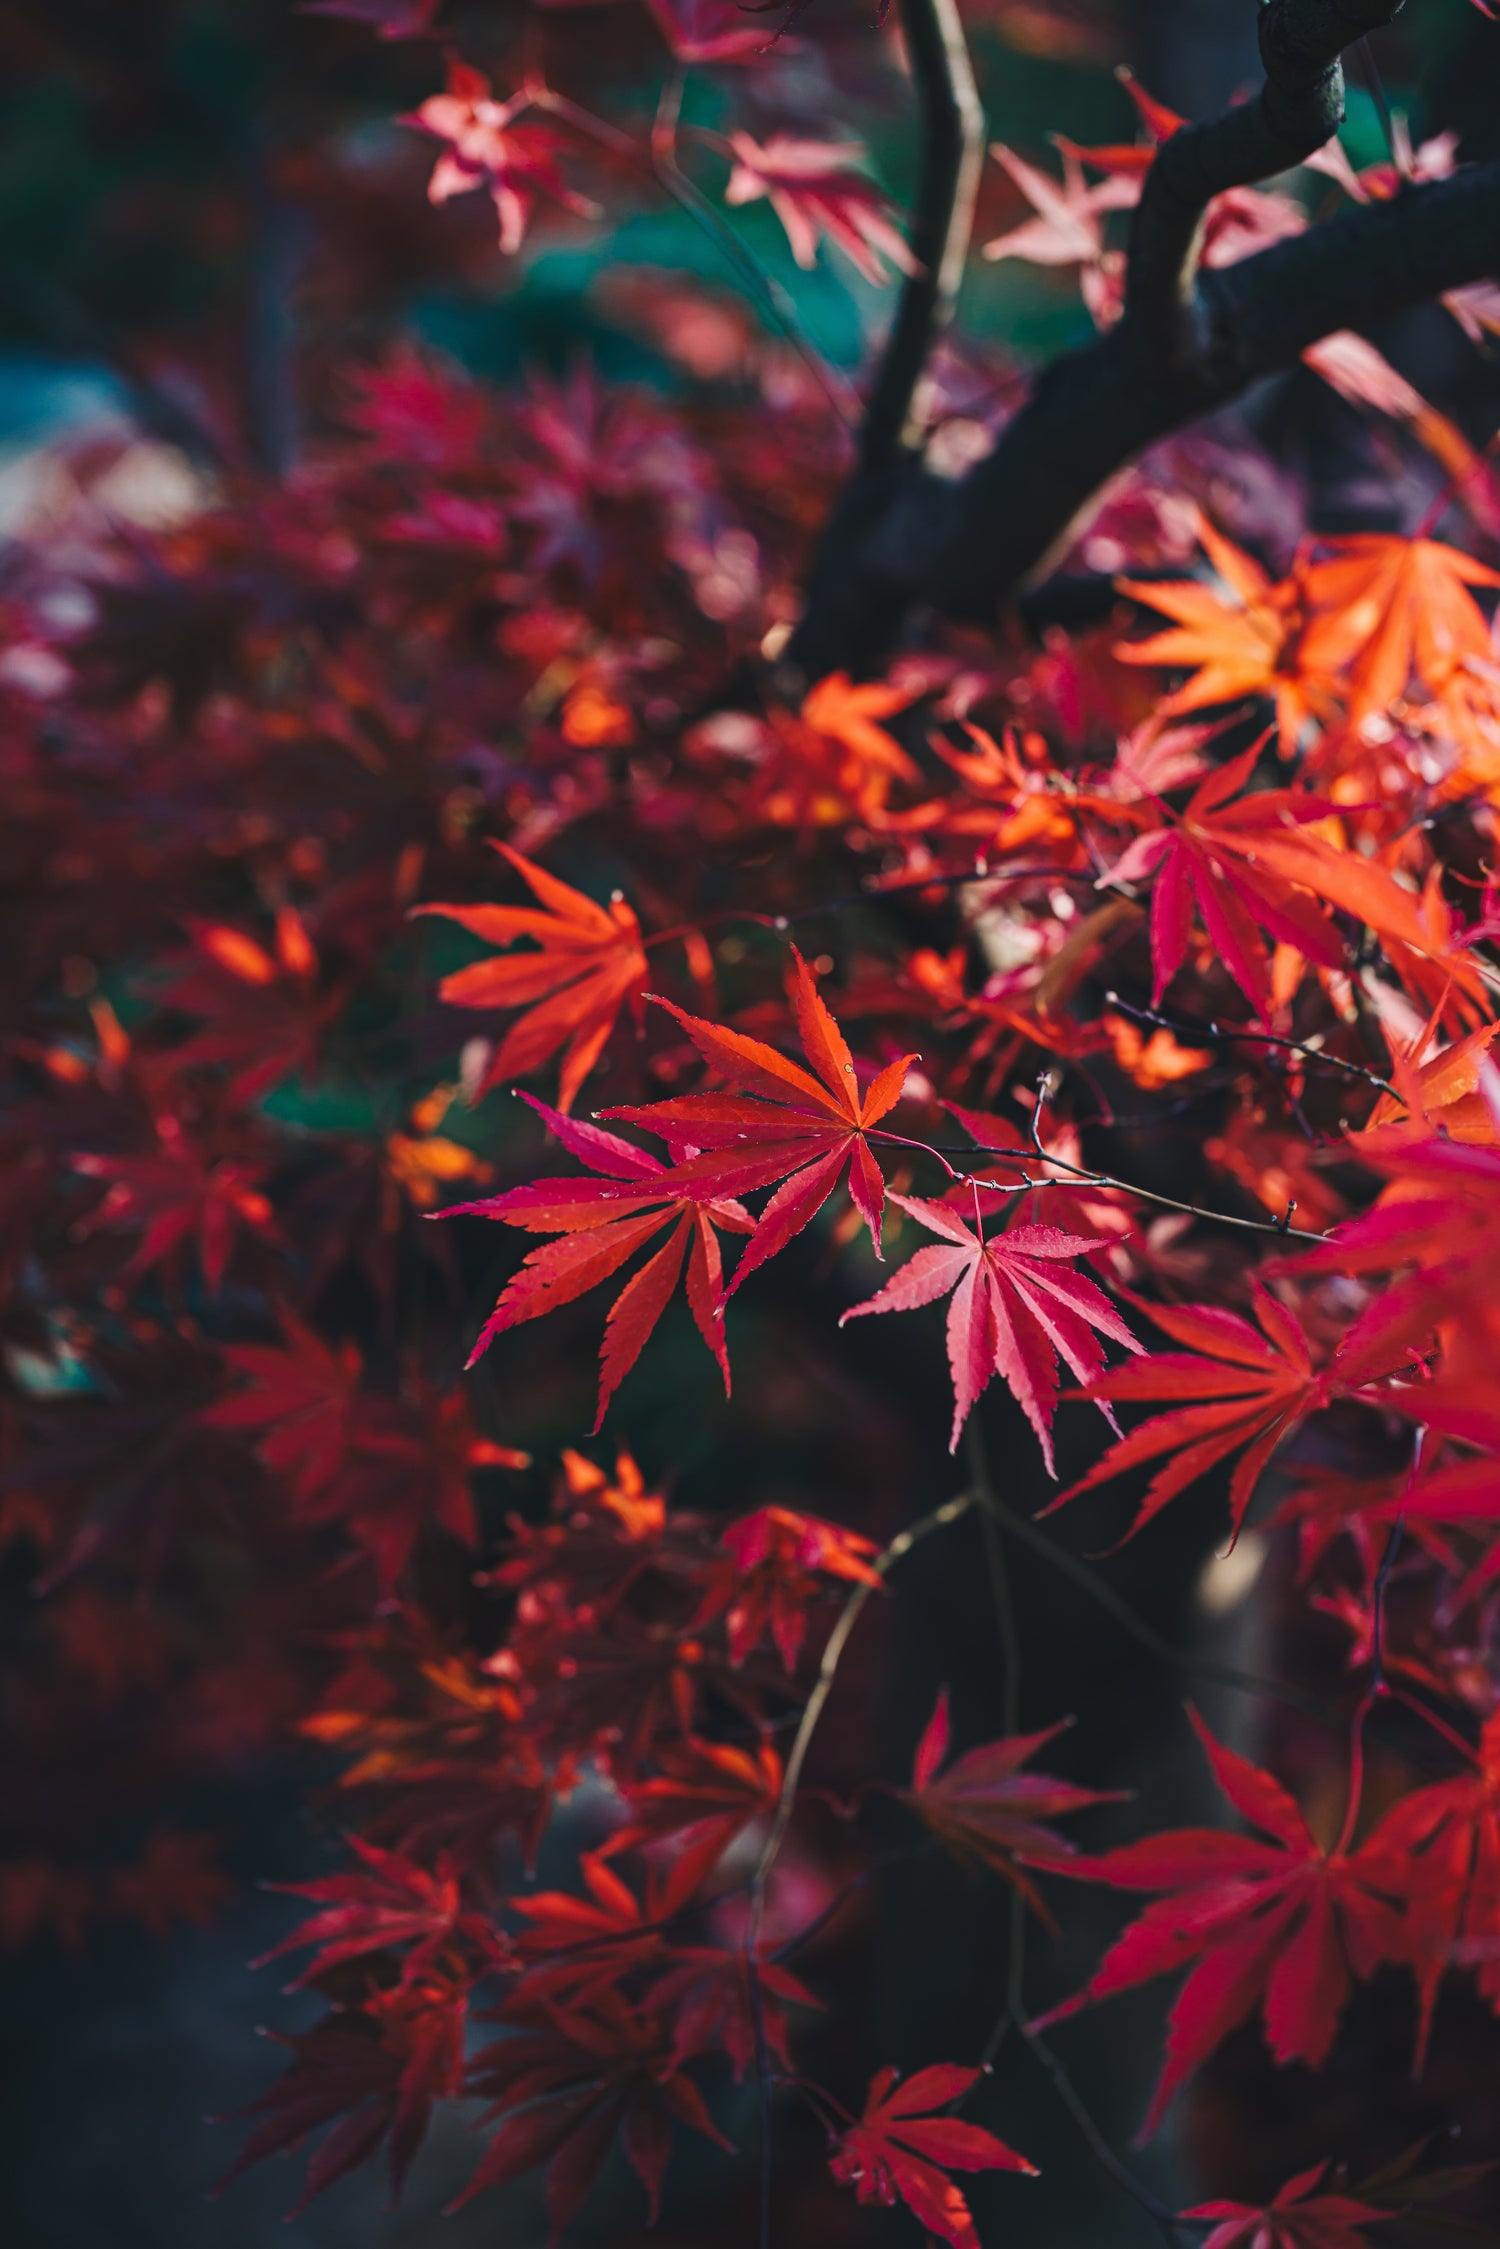 Acer Japonicum: The Top 10 Japanese Maple Trees You'll Adore